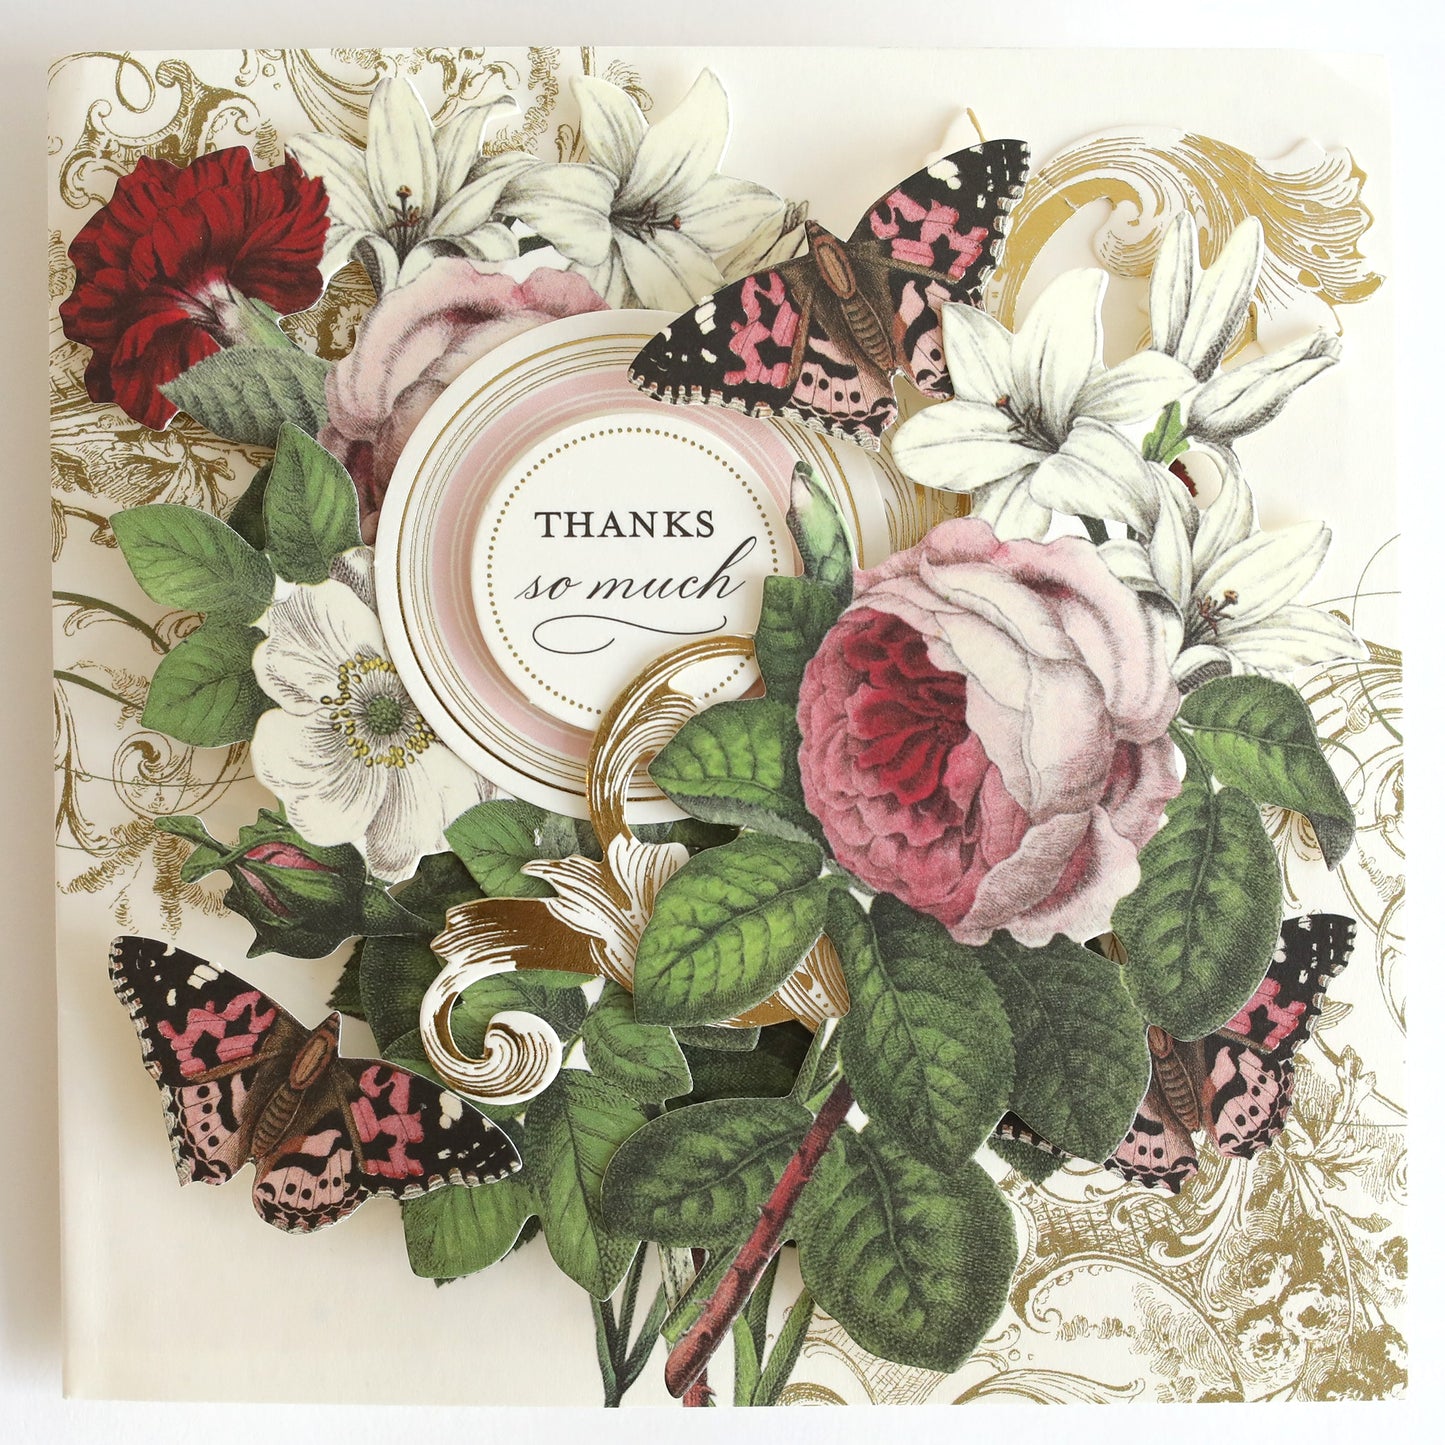 a thank card with flowers and butterflies on it.